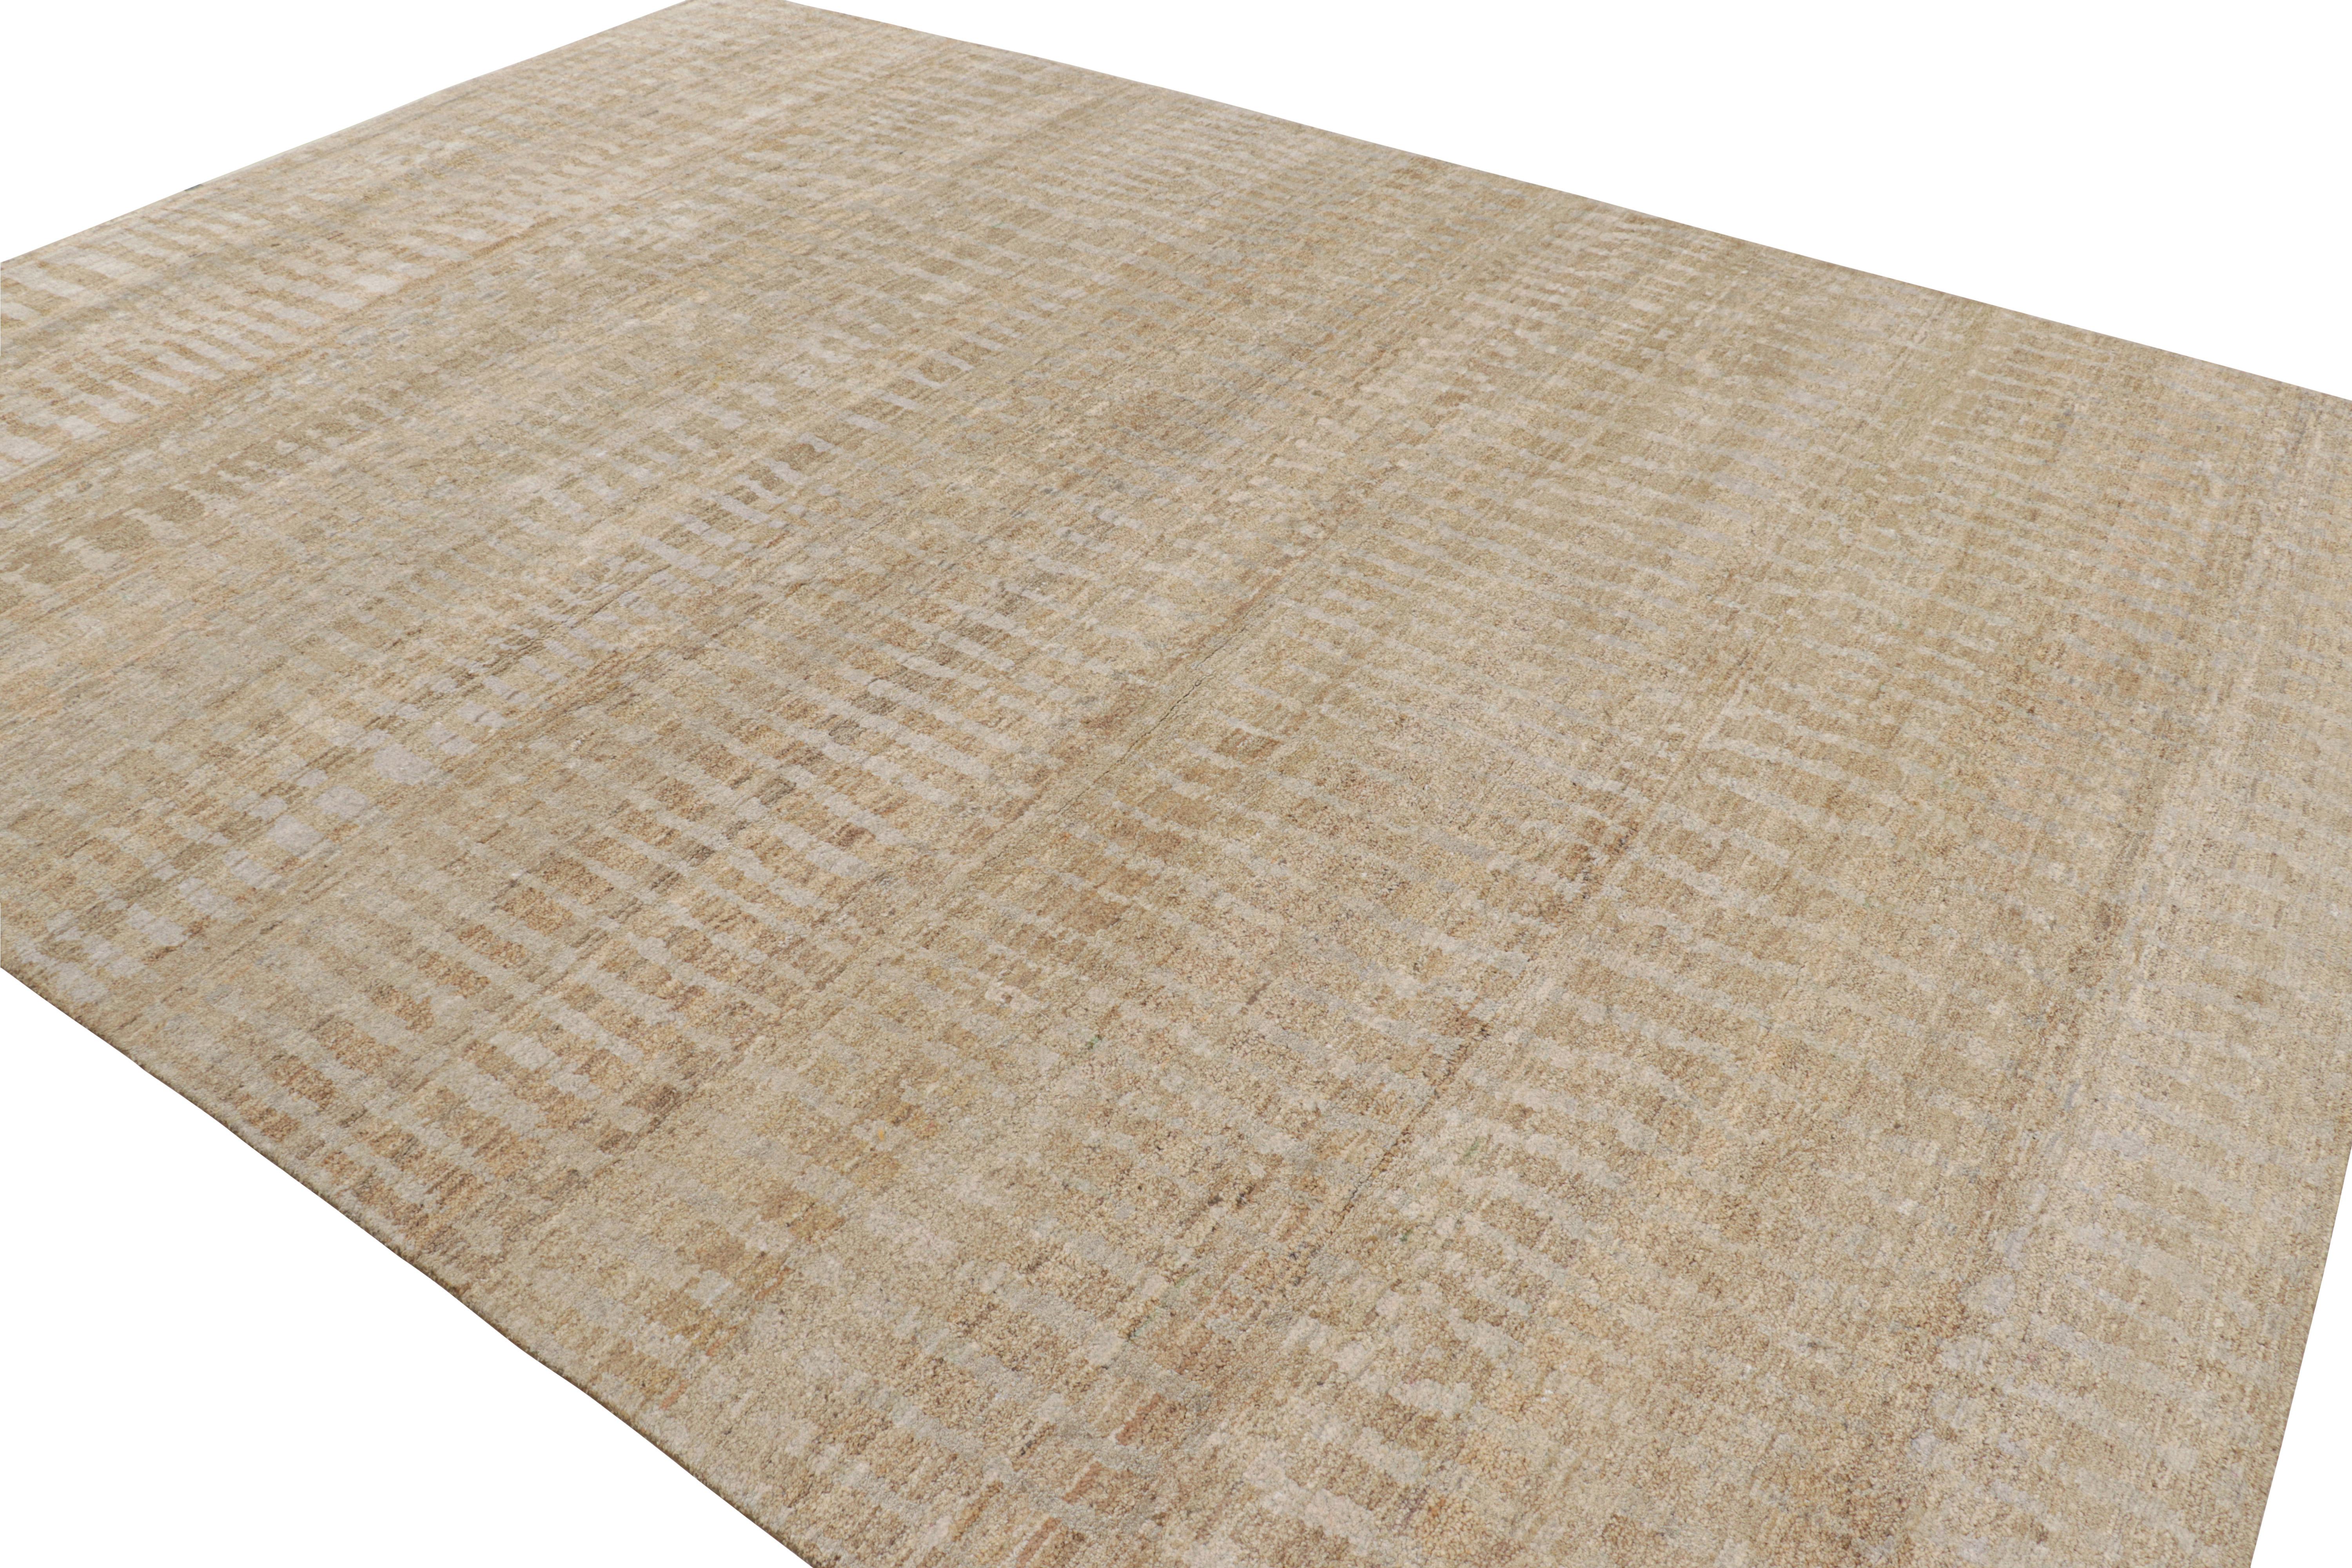 Indian Rug & Kilim’s Contemporary Textural Rug in Beige-Brown and Gray Tones For Sale